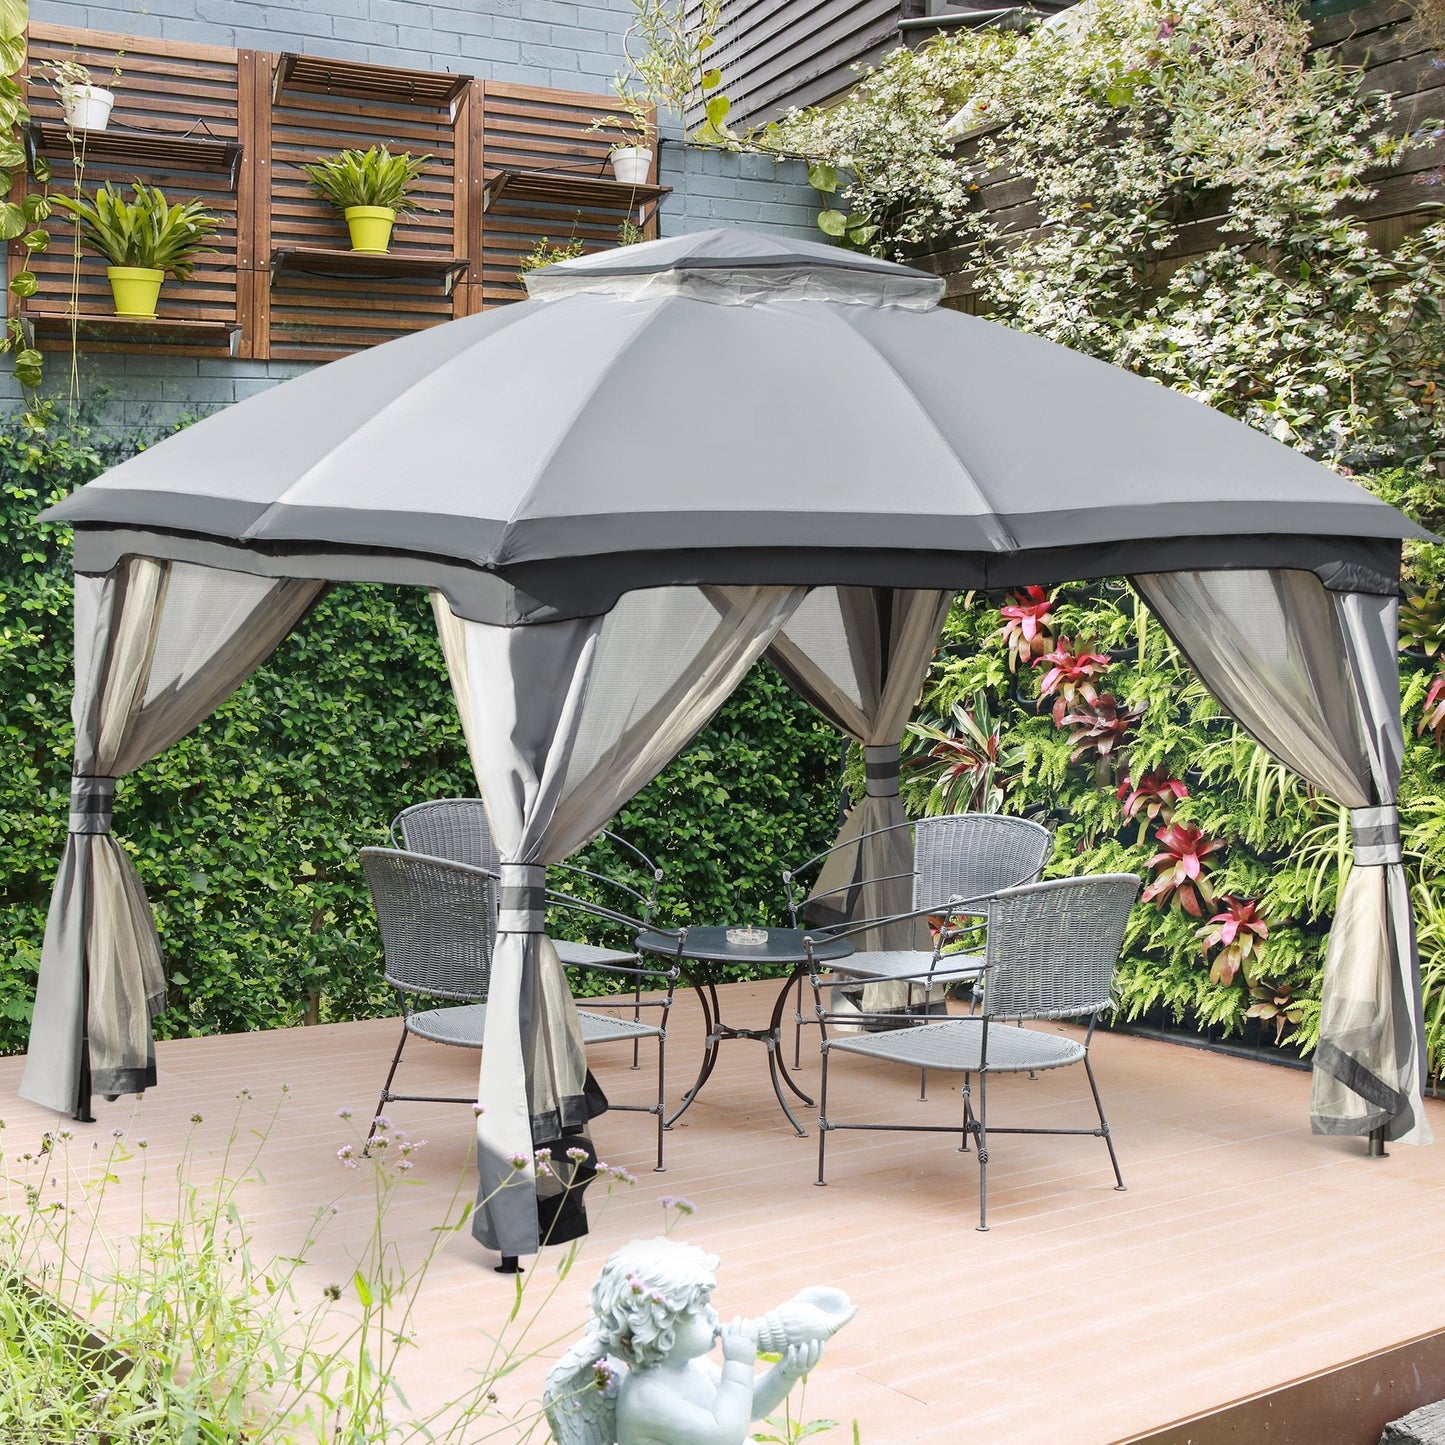 Outdoor and Garden-10' x 12' Outdoor Gazebo, Patio Gazebo Canopy Shelter w/ Double Vented Roof, Zippered Mesh Sidewalls, Solid Steel Frame, Grey - Outdoor Style Company